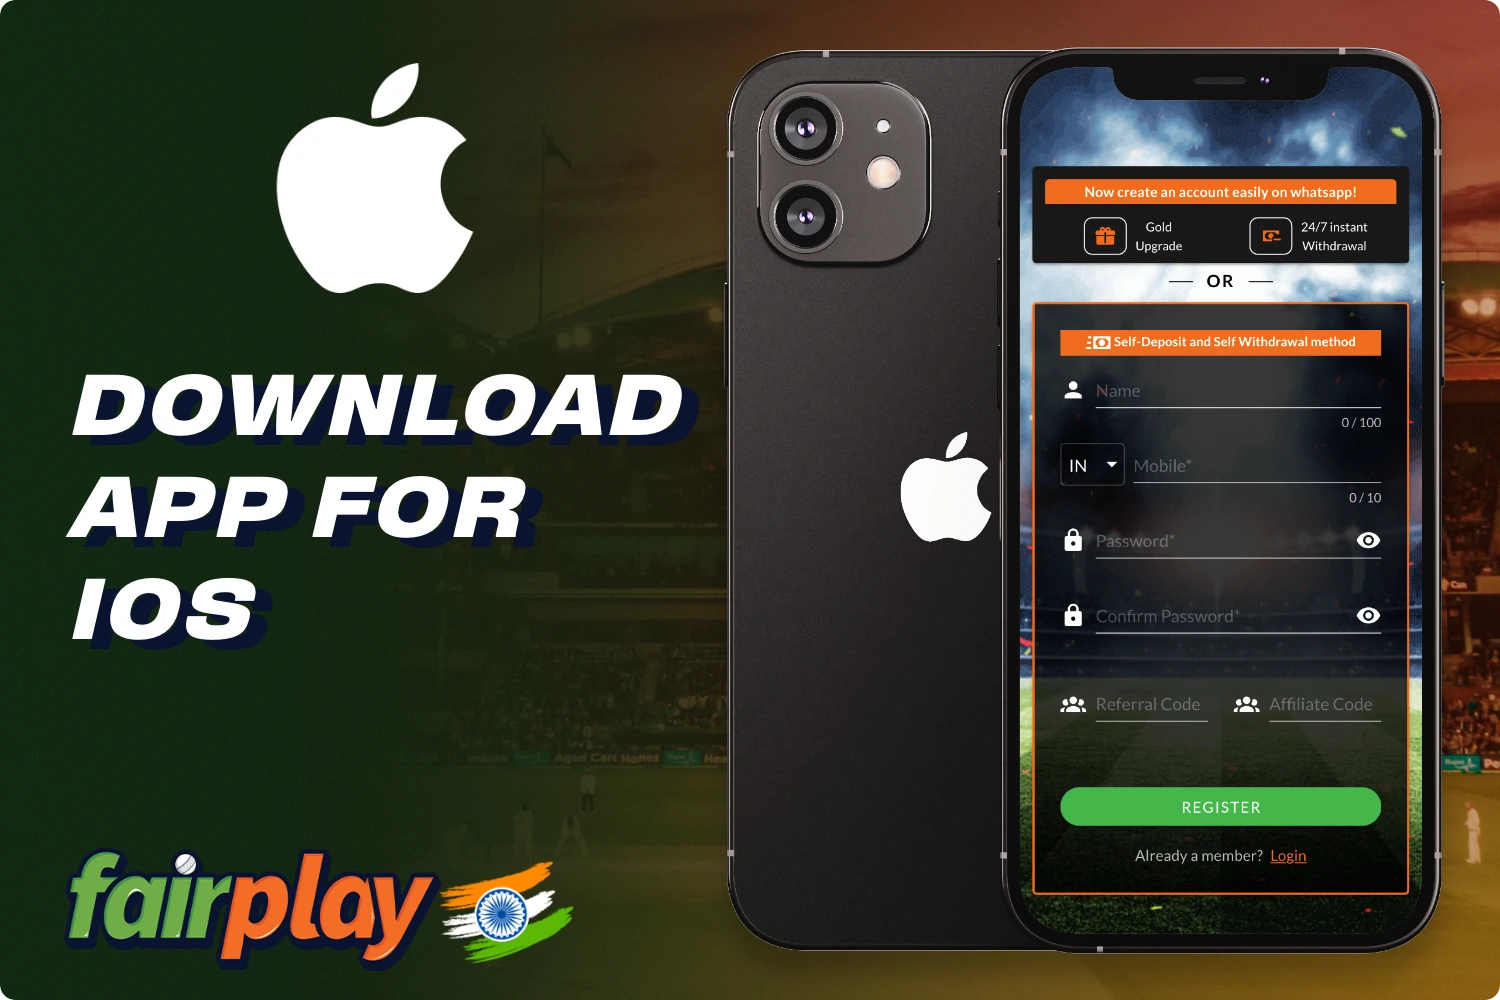 iPhone and iPad users do not need to download the Fairplay app as they can use the mobile version of the site